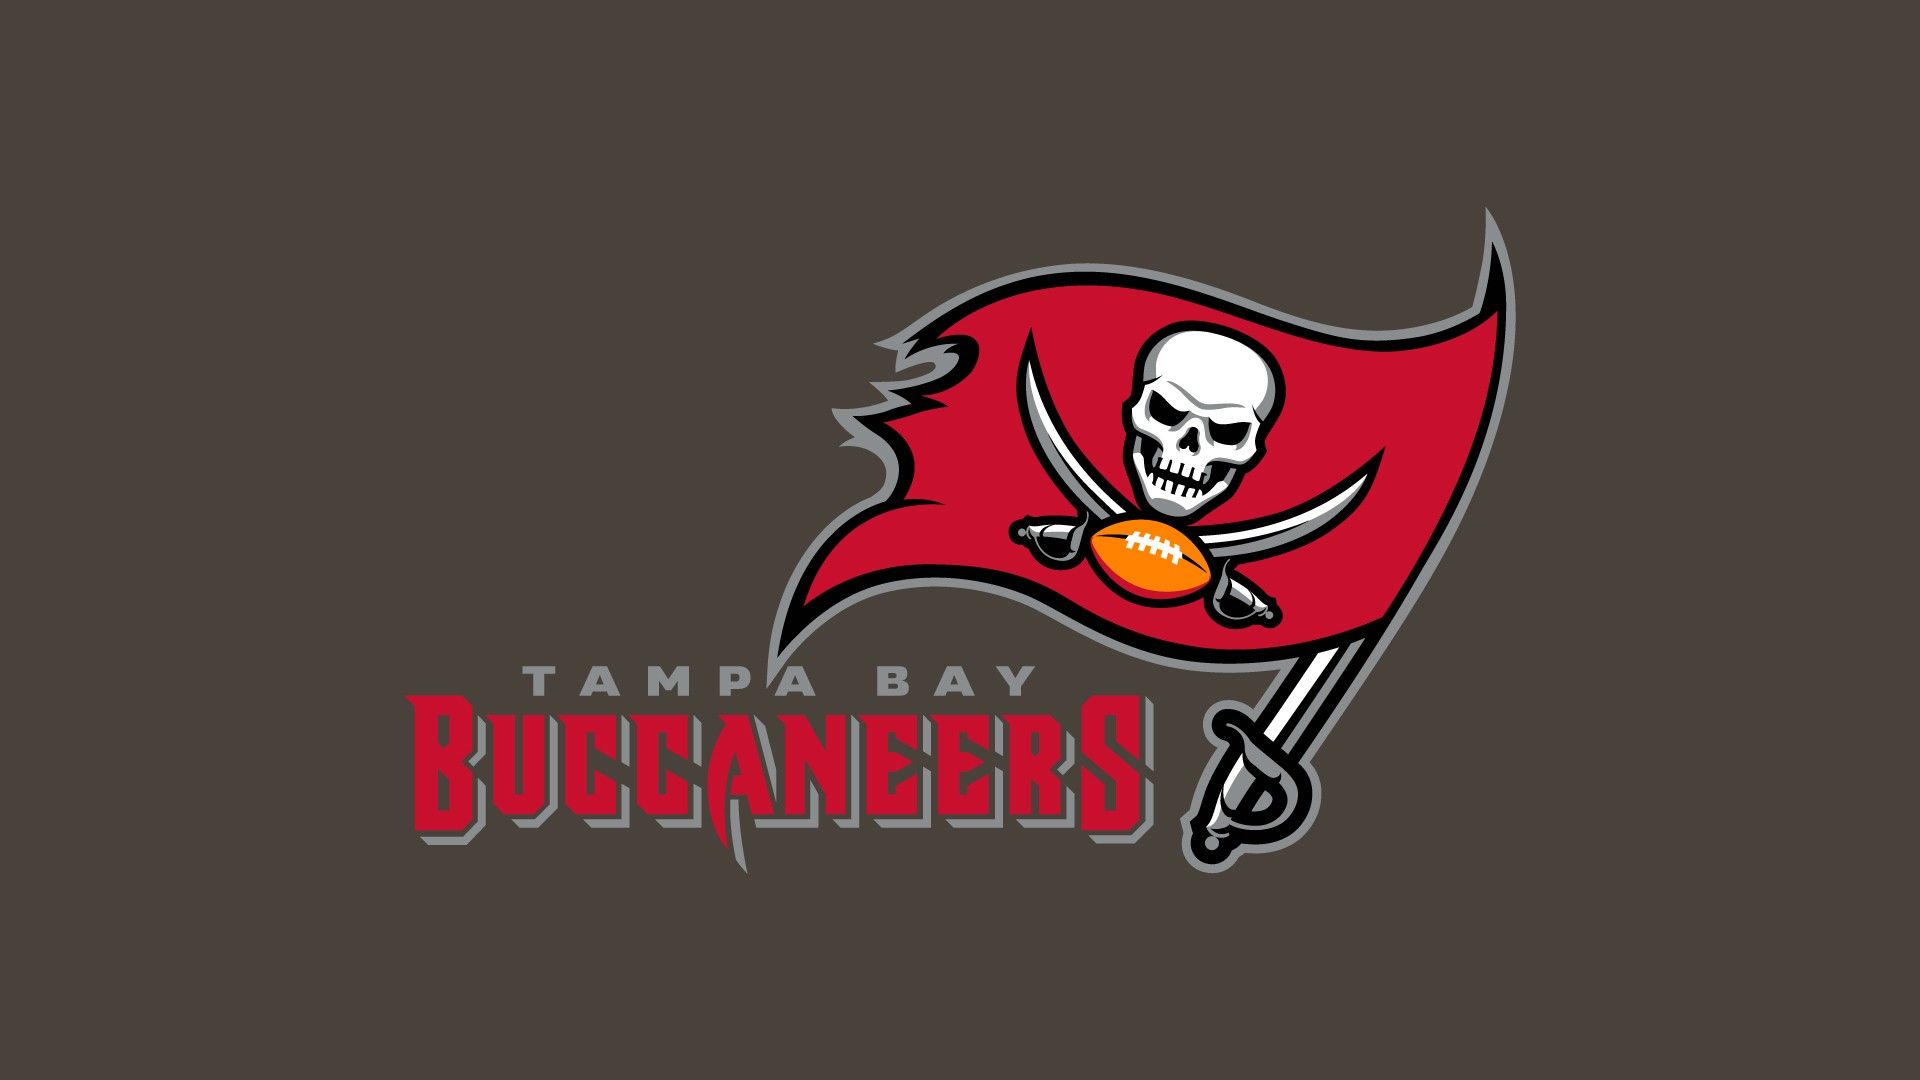 Bucs Wallpapers - Page 4 - Off-Topic - Unofficial Message Board of ...